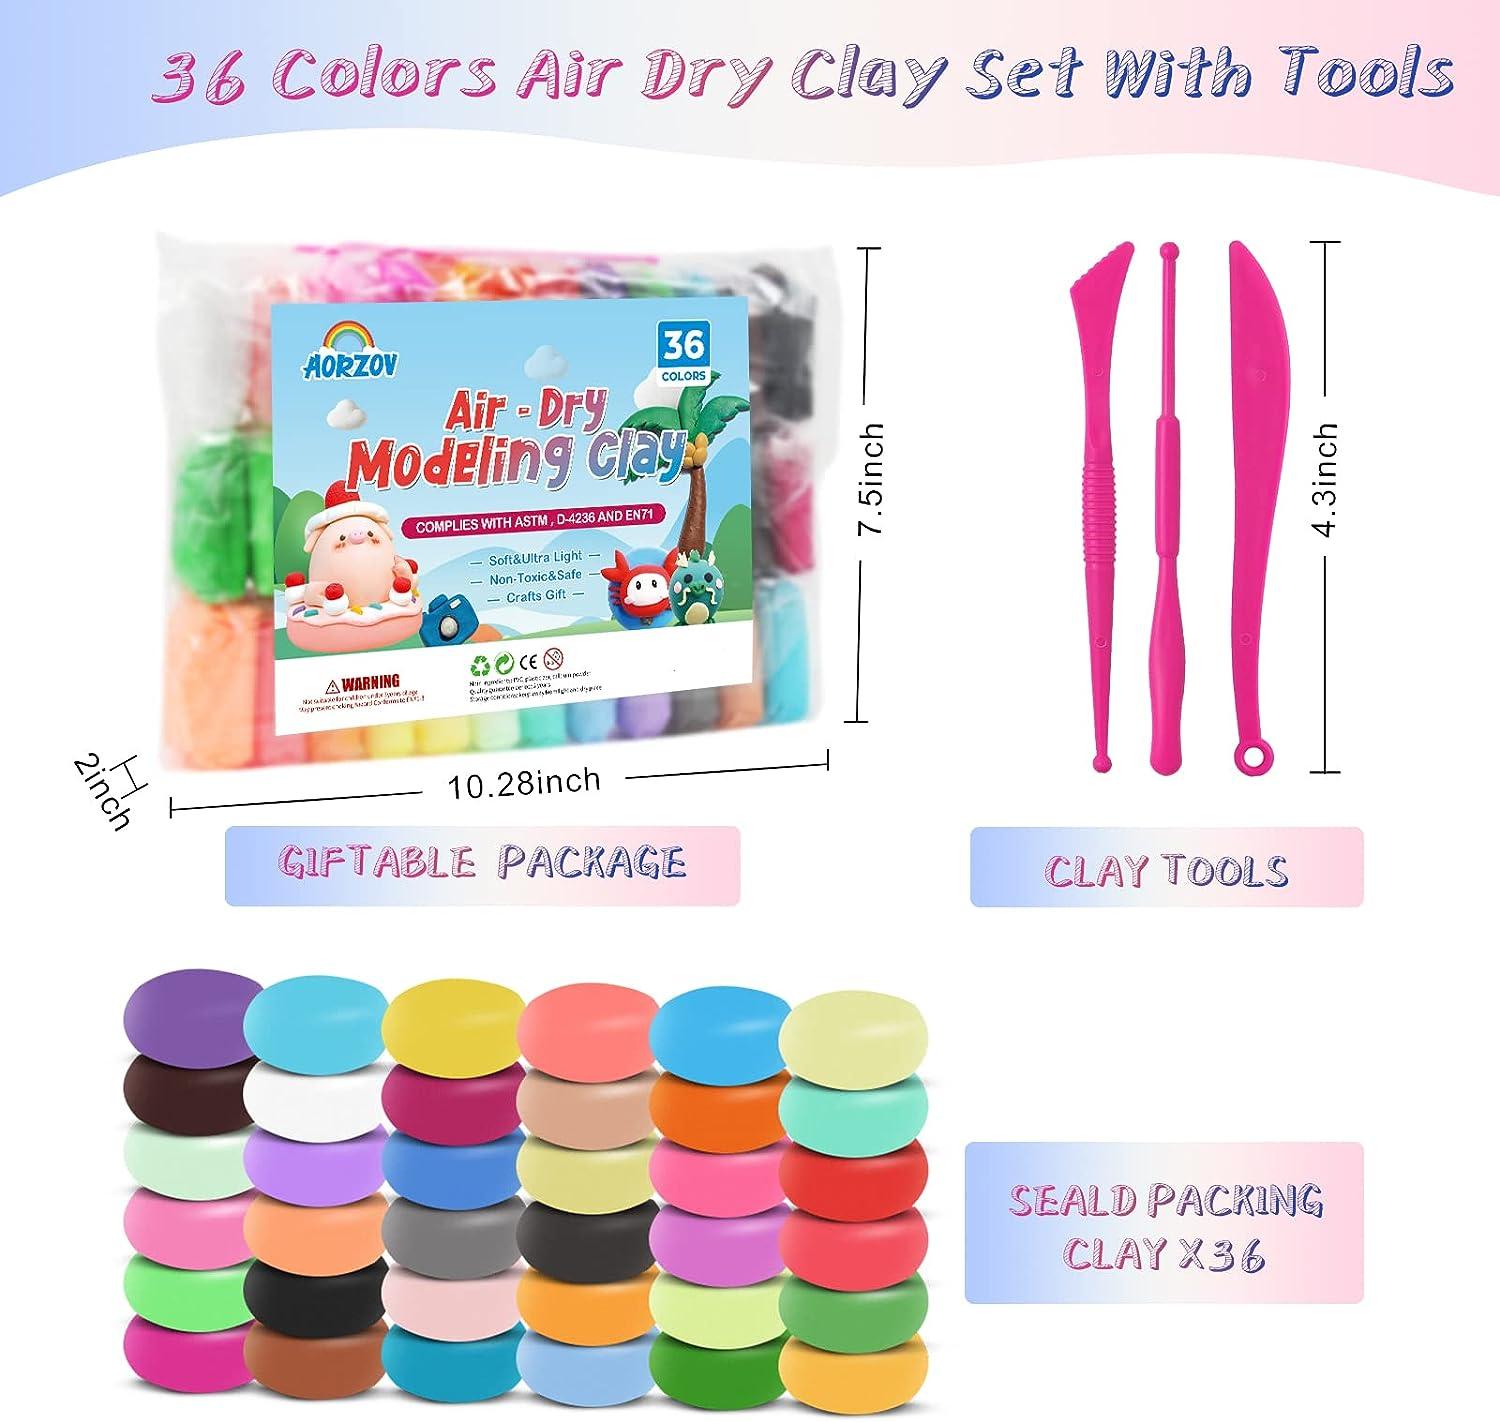  Drawdart Air Dry Clay- 36 Colors Modeling Clay Kit with 3  Sculpting Tools, Safe & Non-Toxic, Magic Foam Clay for Kids and Adults, DIY  Molding Clay Gift for Boys and Girls 